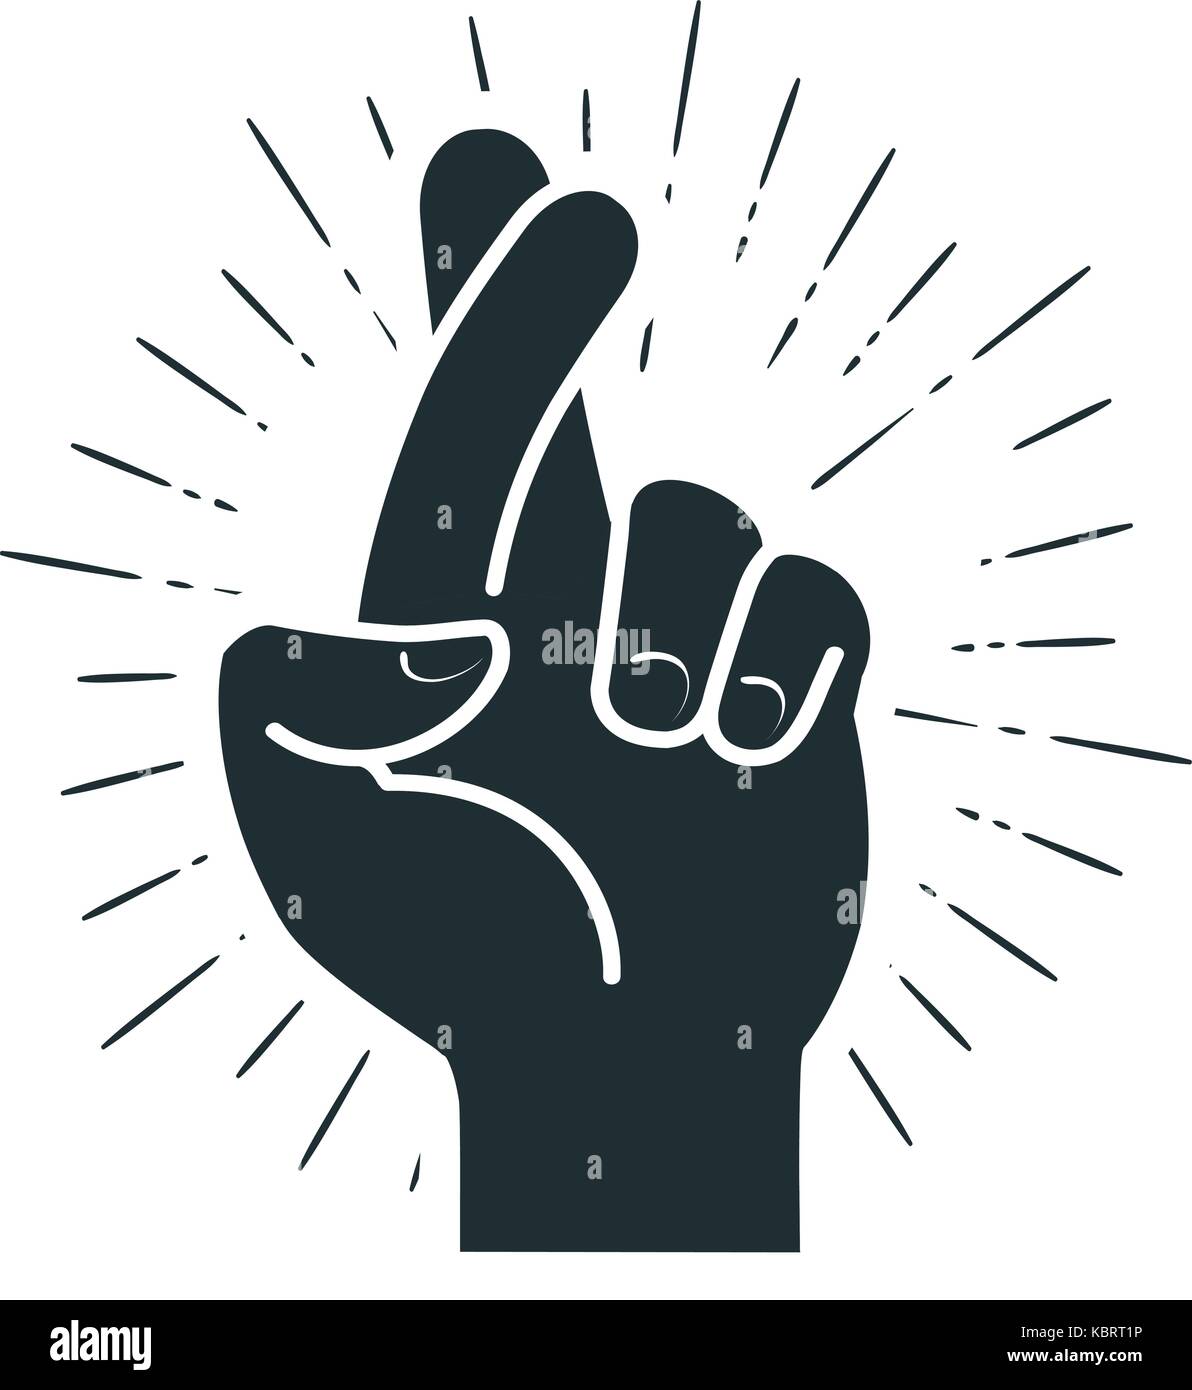 Fingers crossed, hand gesture. Lie, on luck, superstition symbol or icon. Vector illustration Stock Vector